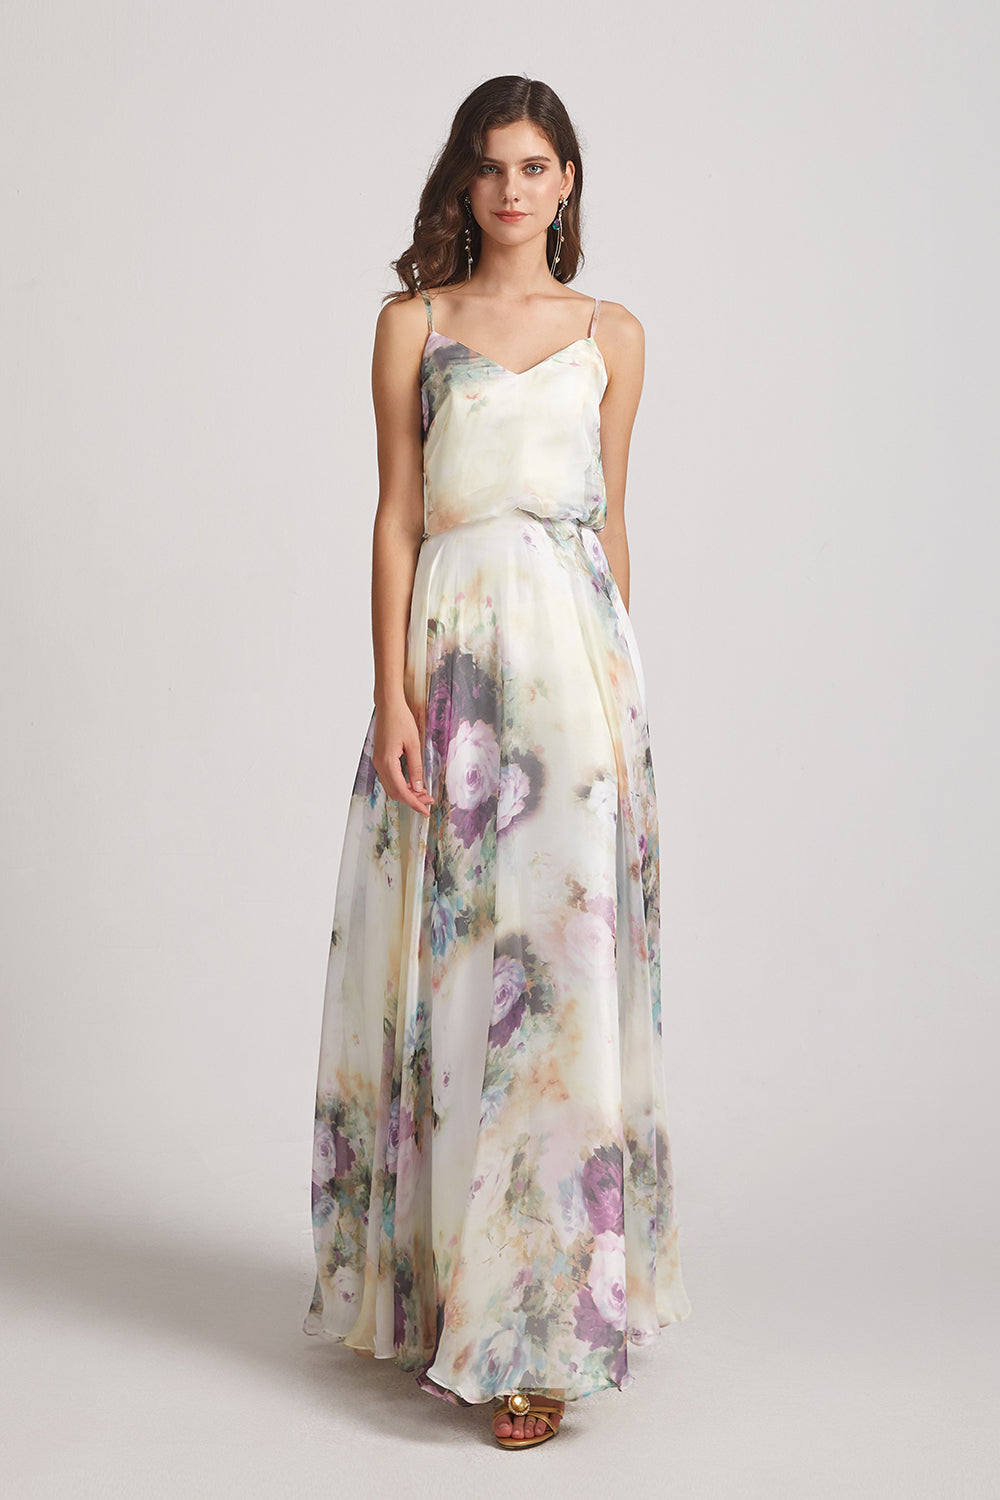 spaghetti straps v-neck floral bridesmaids gowns